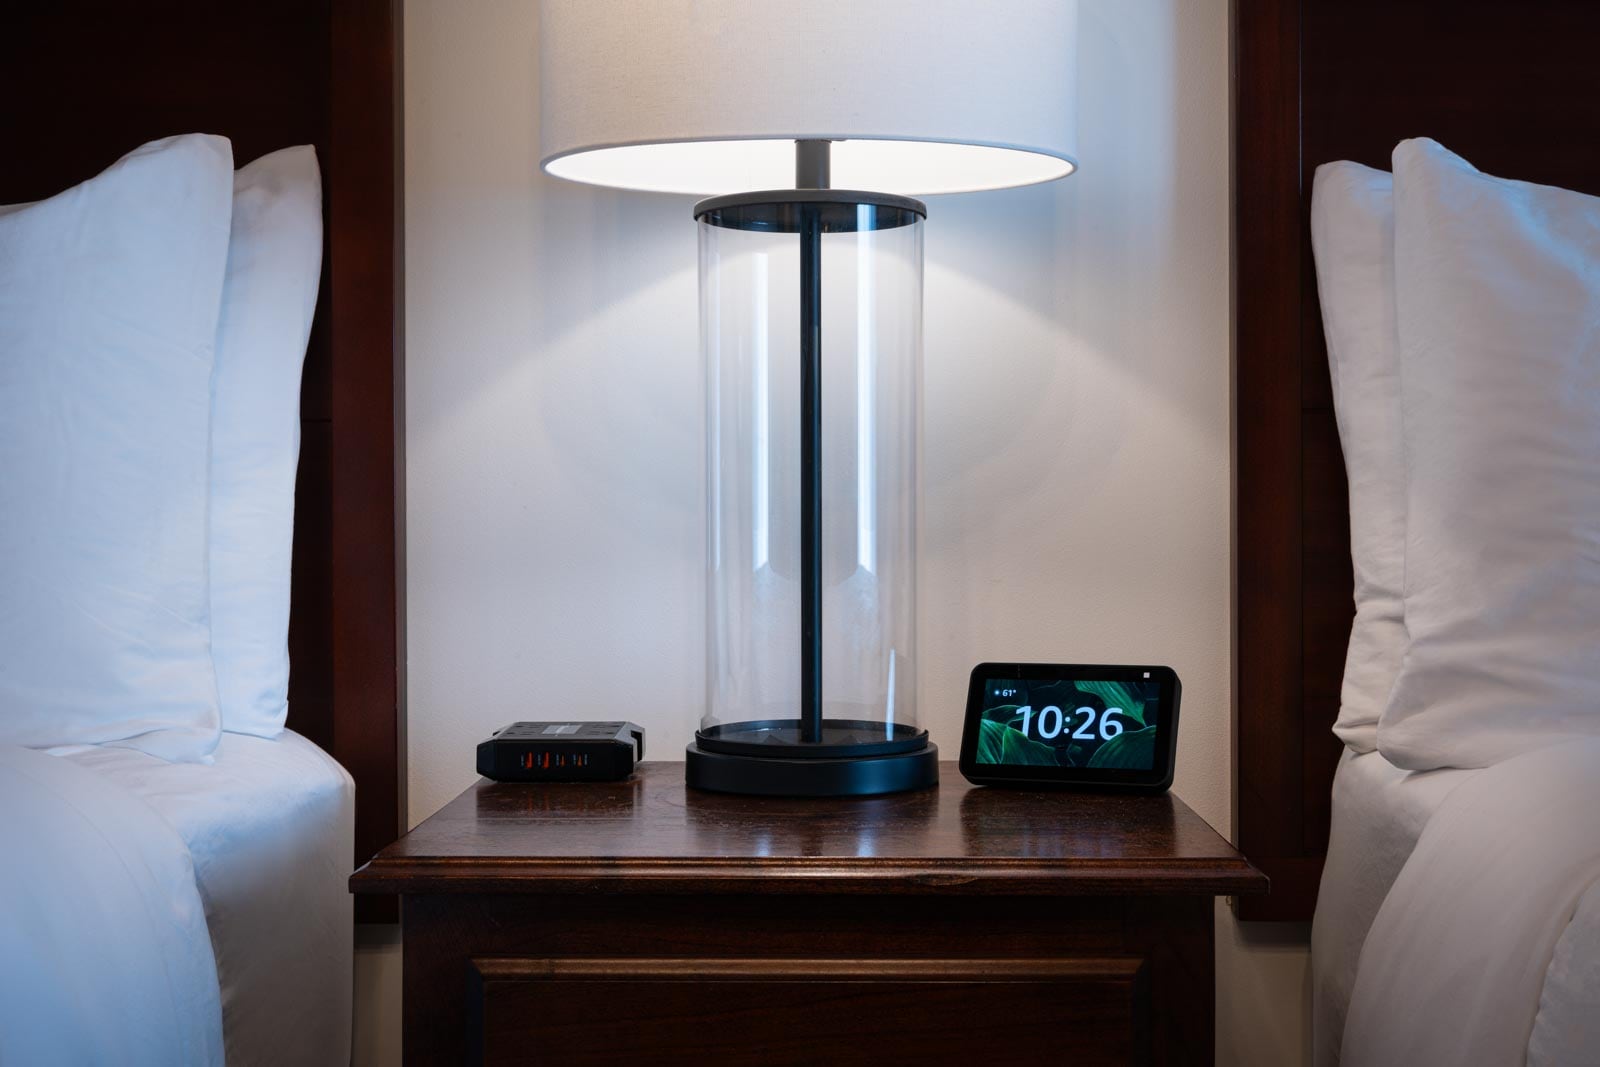 A bedside table with a clock on it.